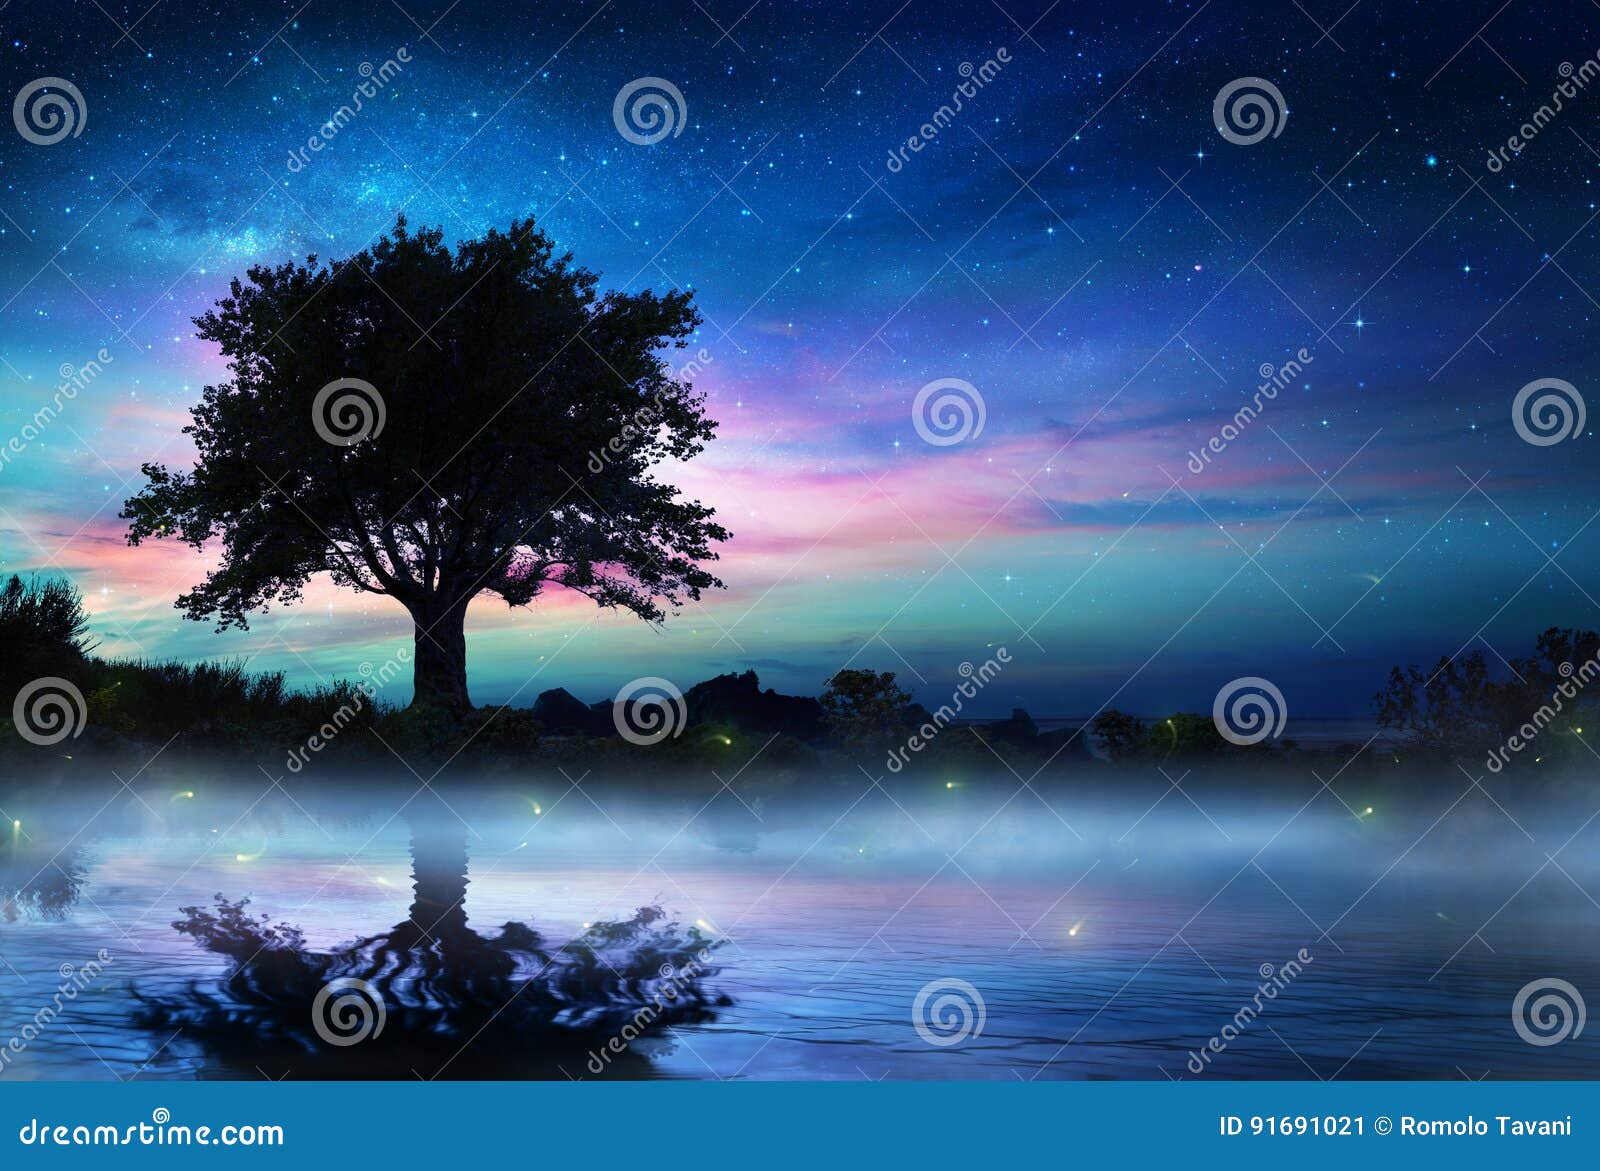 starry night with lonely tree